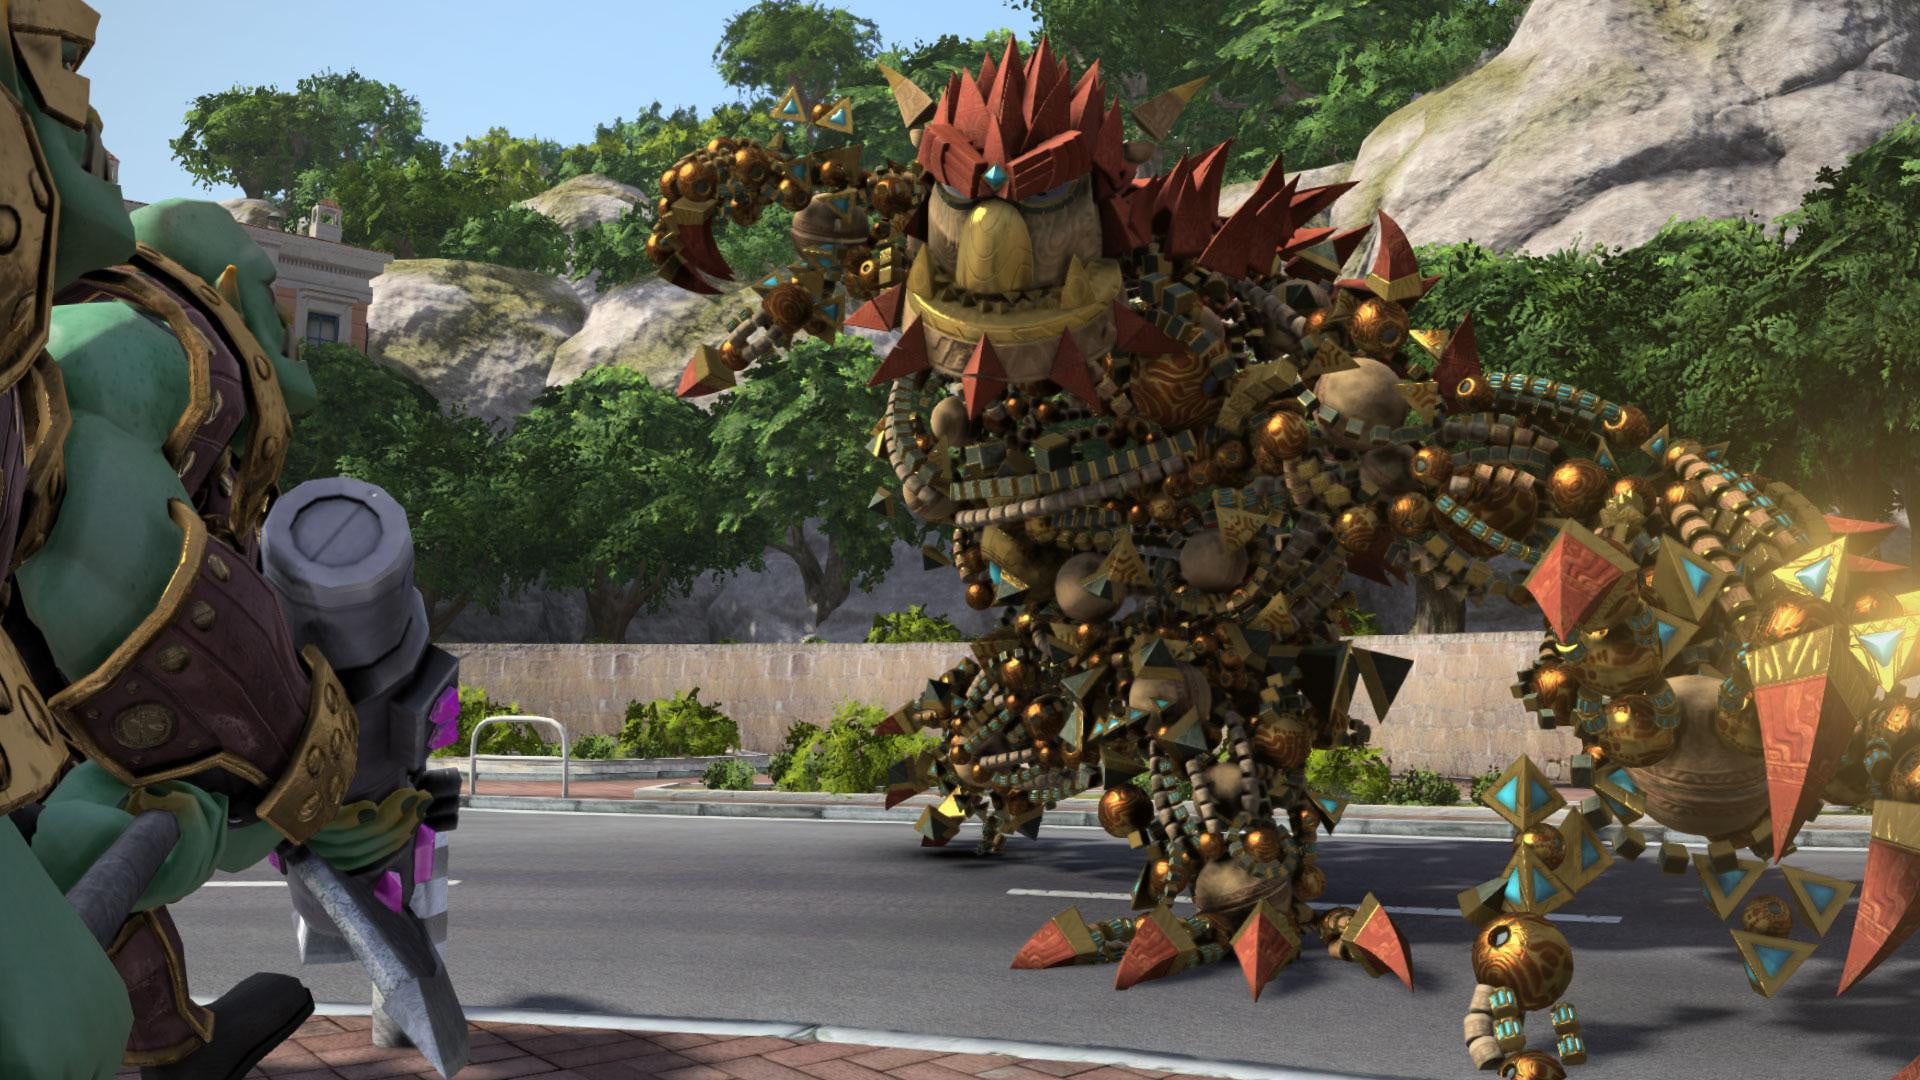 Things You Should Know Before Starting Knack 2